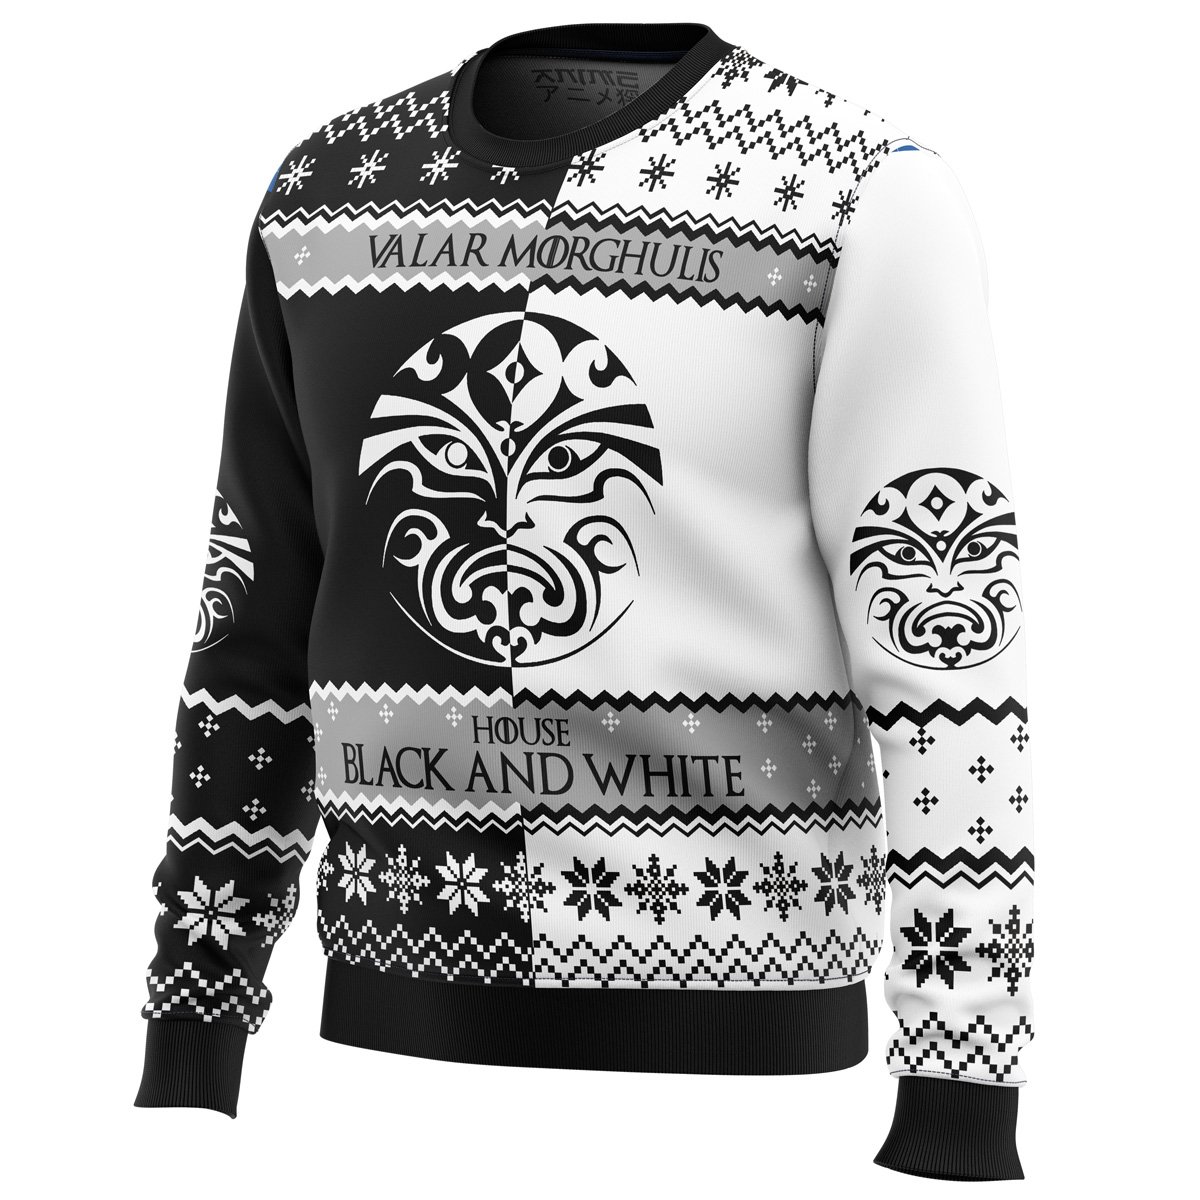 Game of Thrones House Black and White Ugly Christmas Sweater